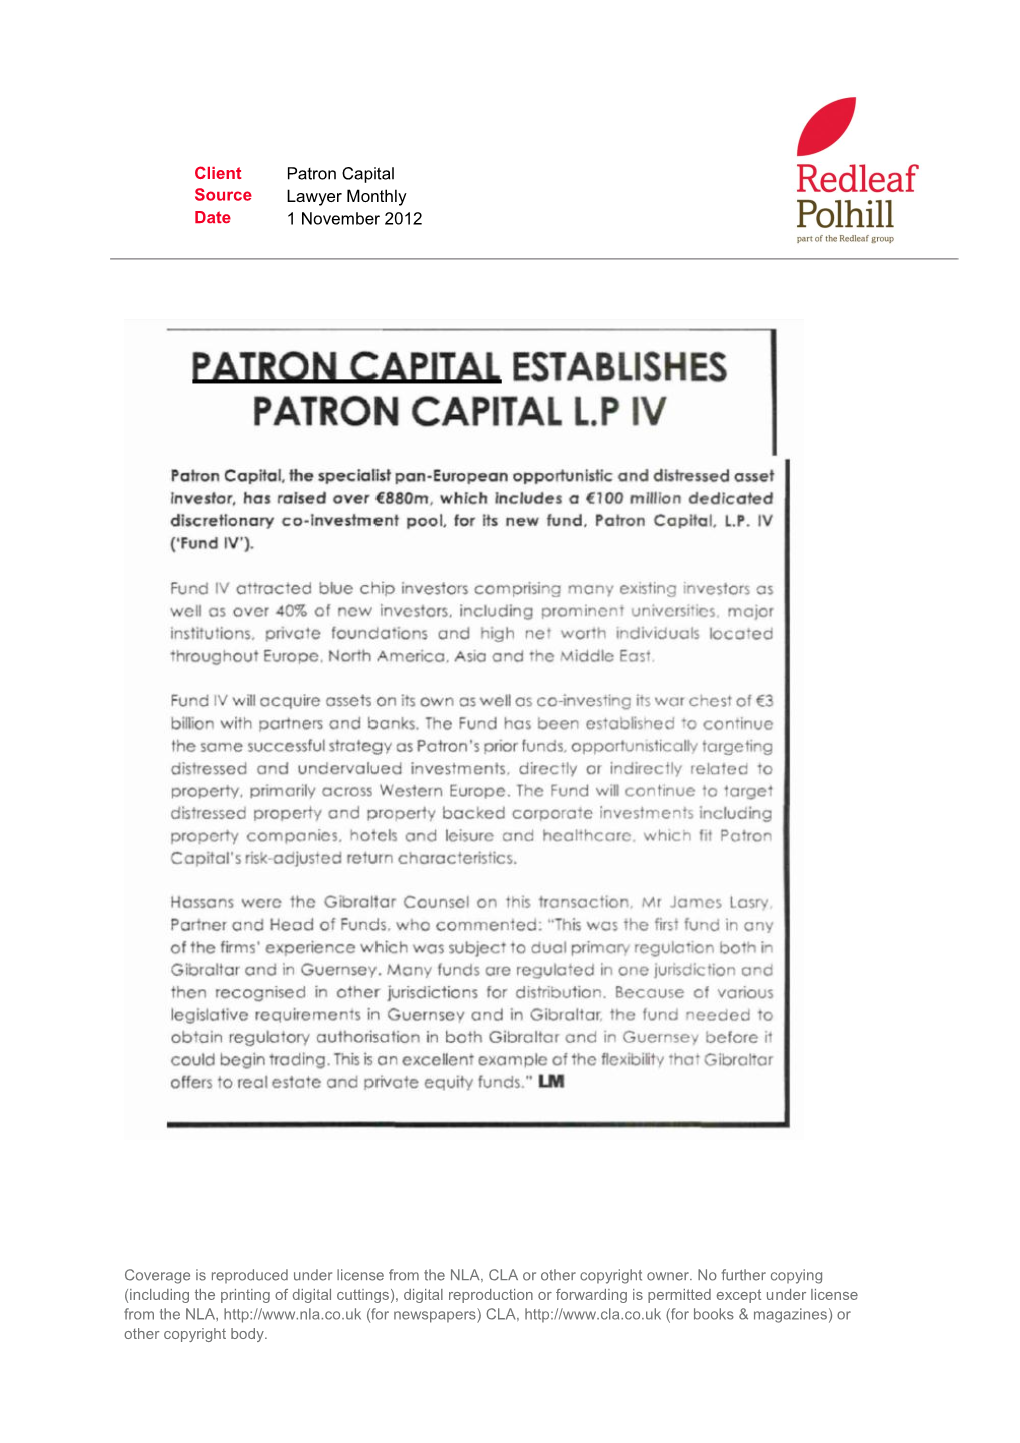 Client Source Date Patron Capital Lawyer Monthly 1 November 2012